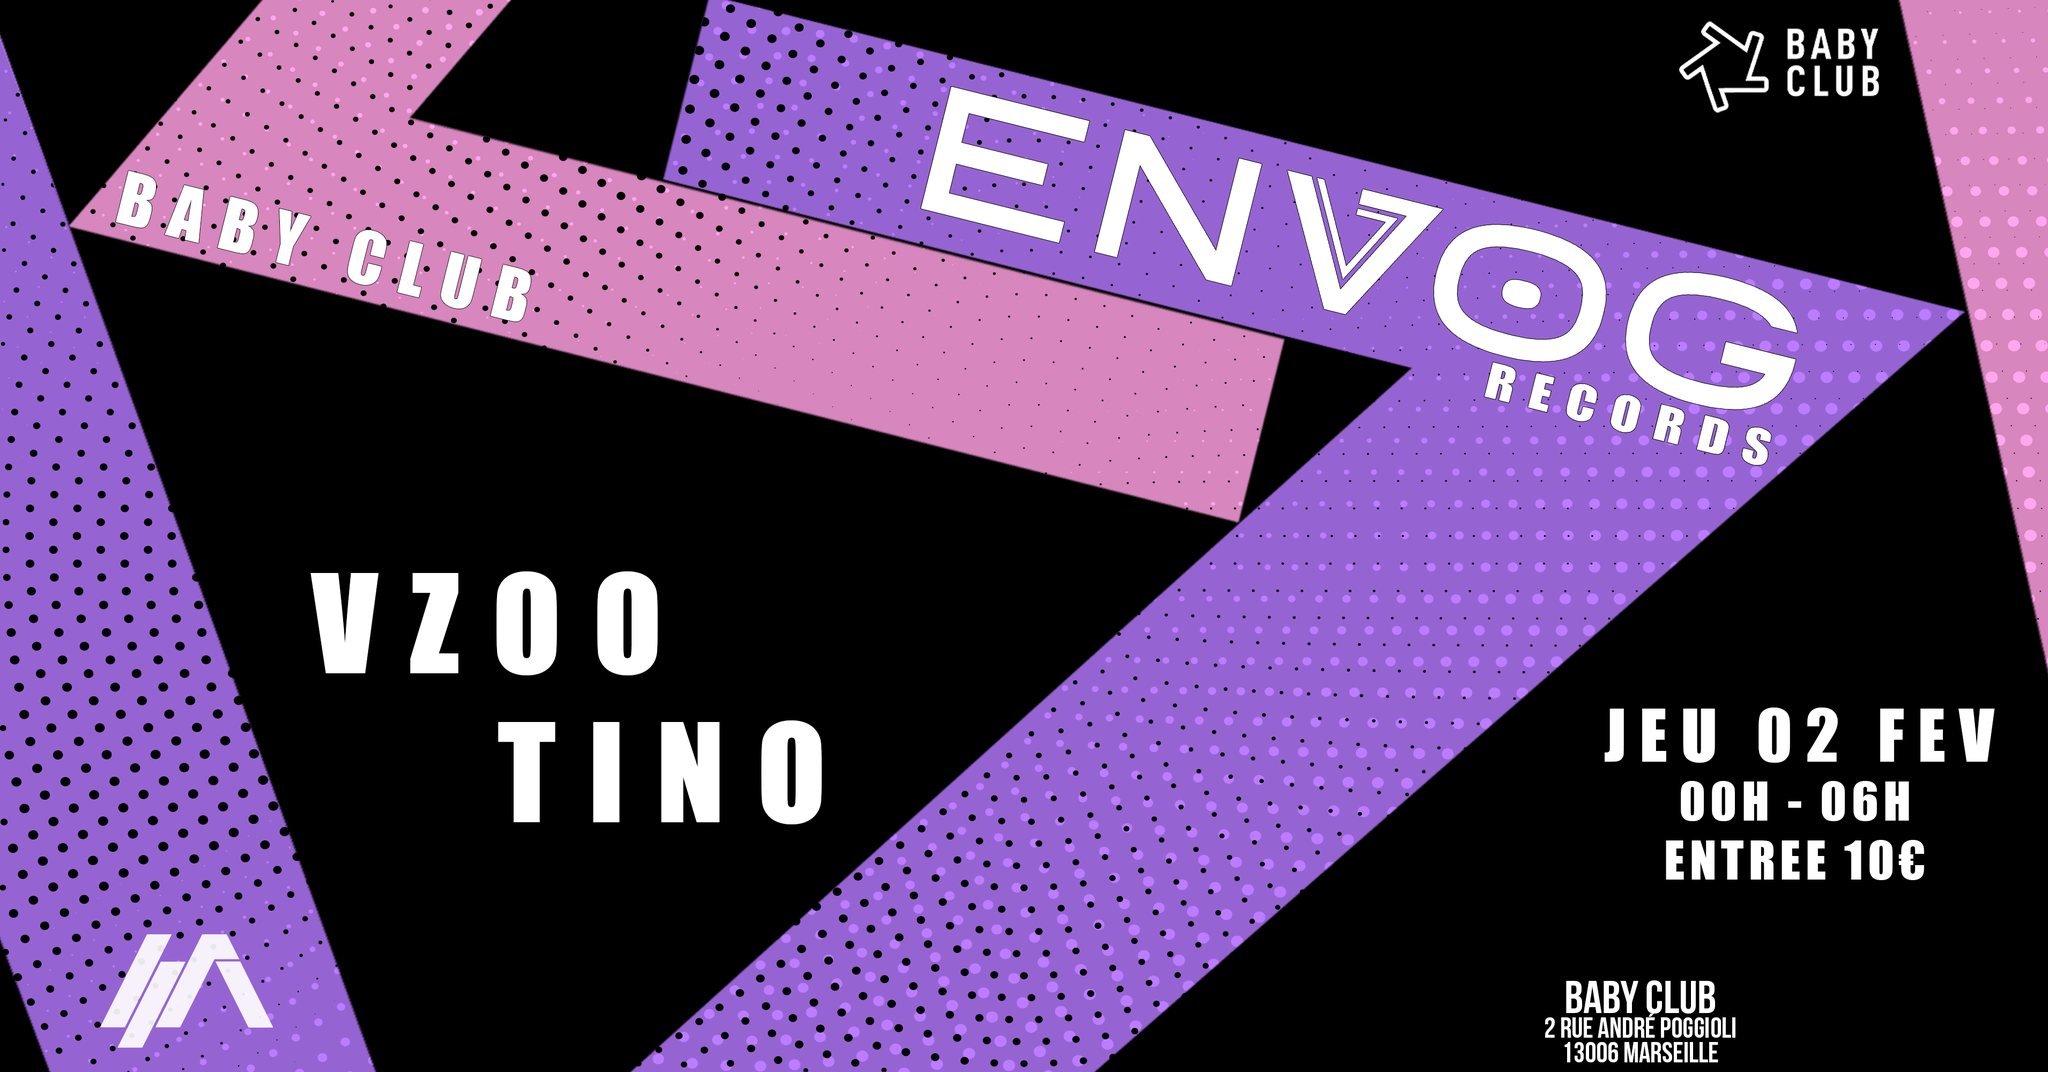 ENVOG RECORDS at the Baby Club of Marseille